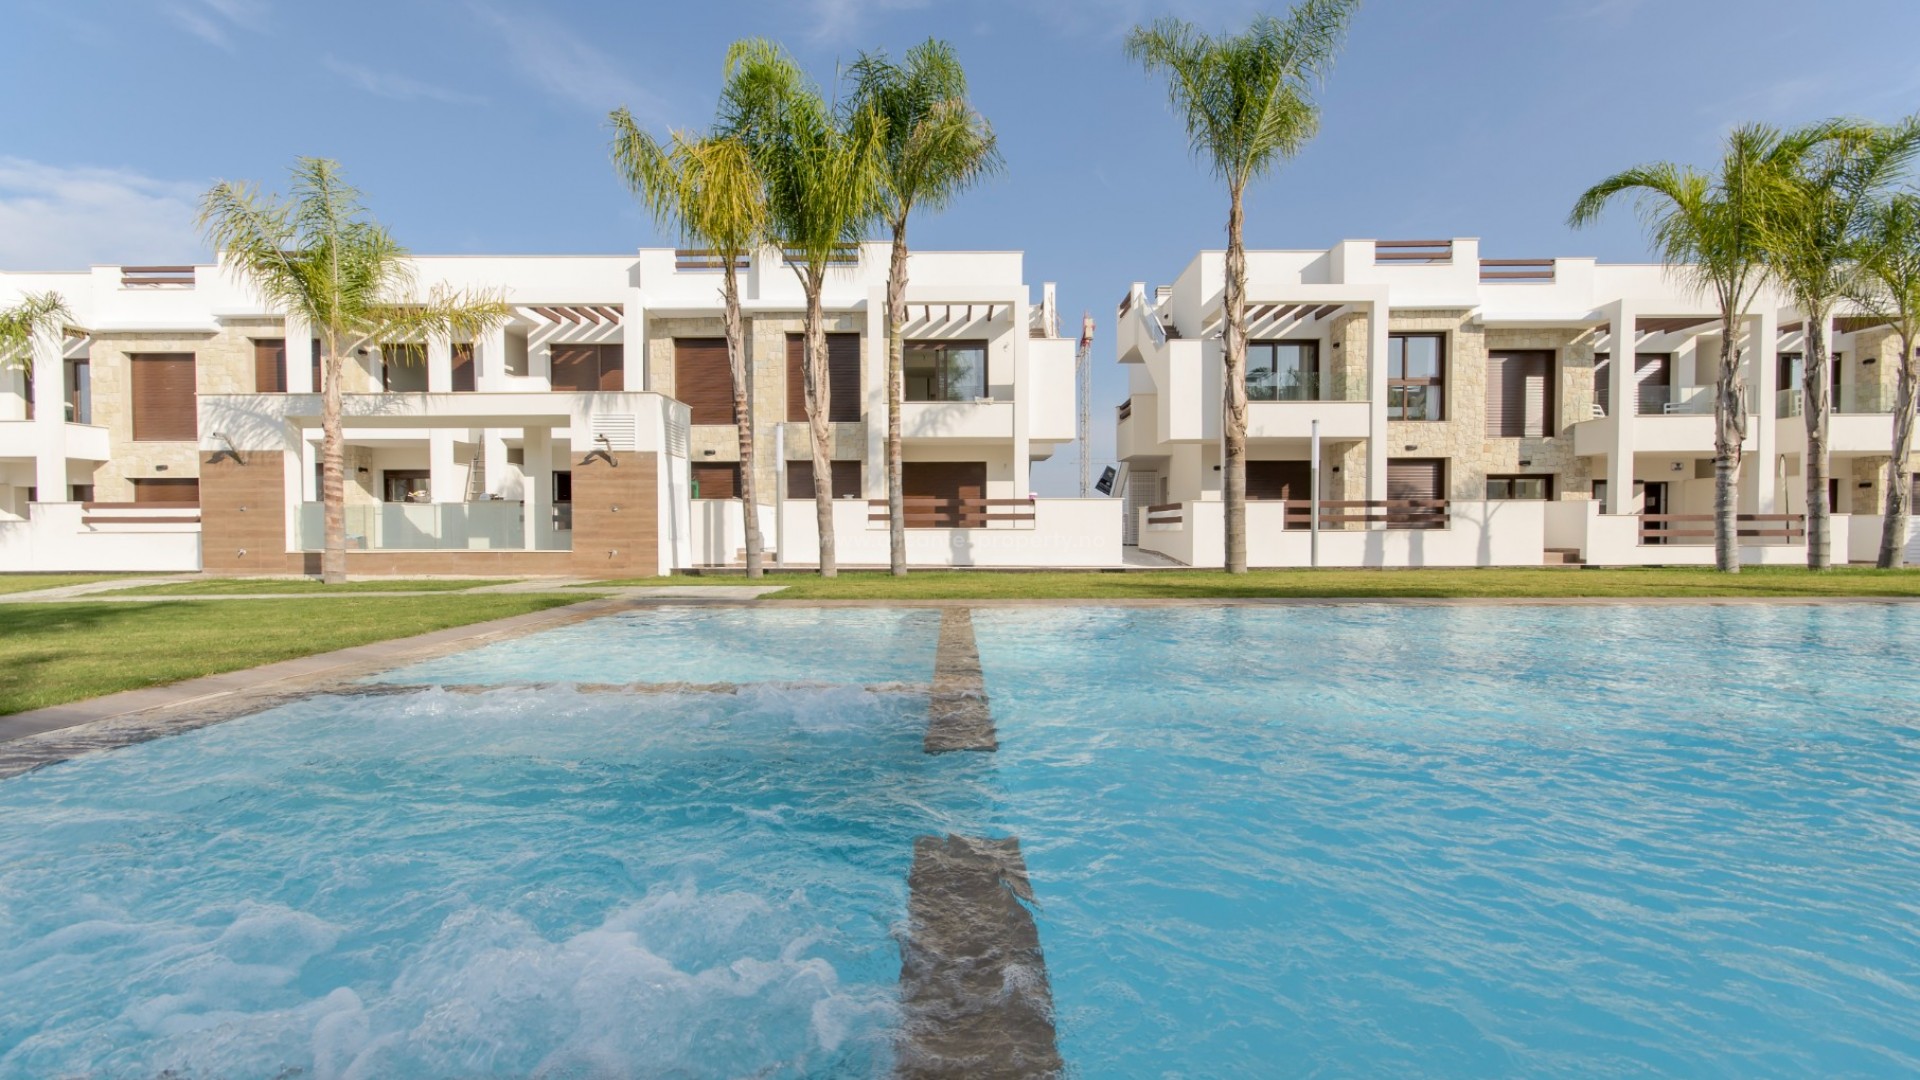 Flats in Los Balcones near Torrevieja, 2 bedrooms and 2 bathrooms, views of the salt lake from the penthouses or green areas. Shared pool